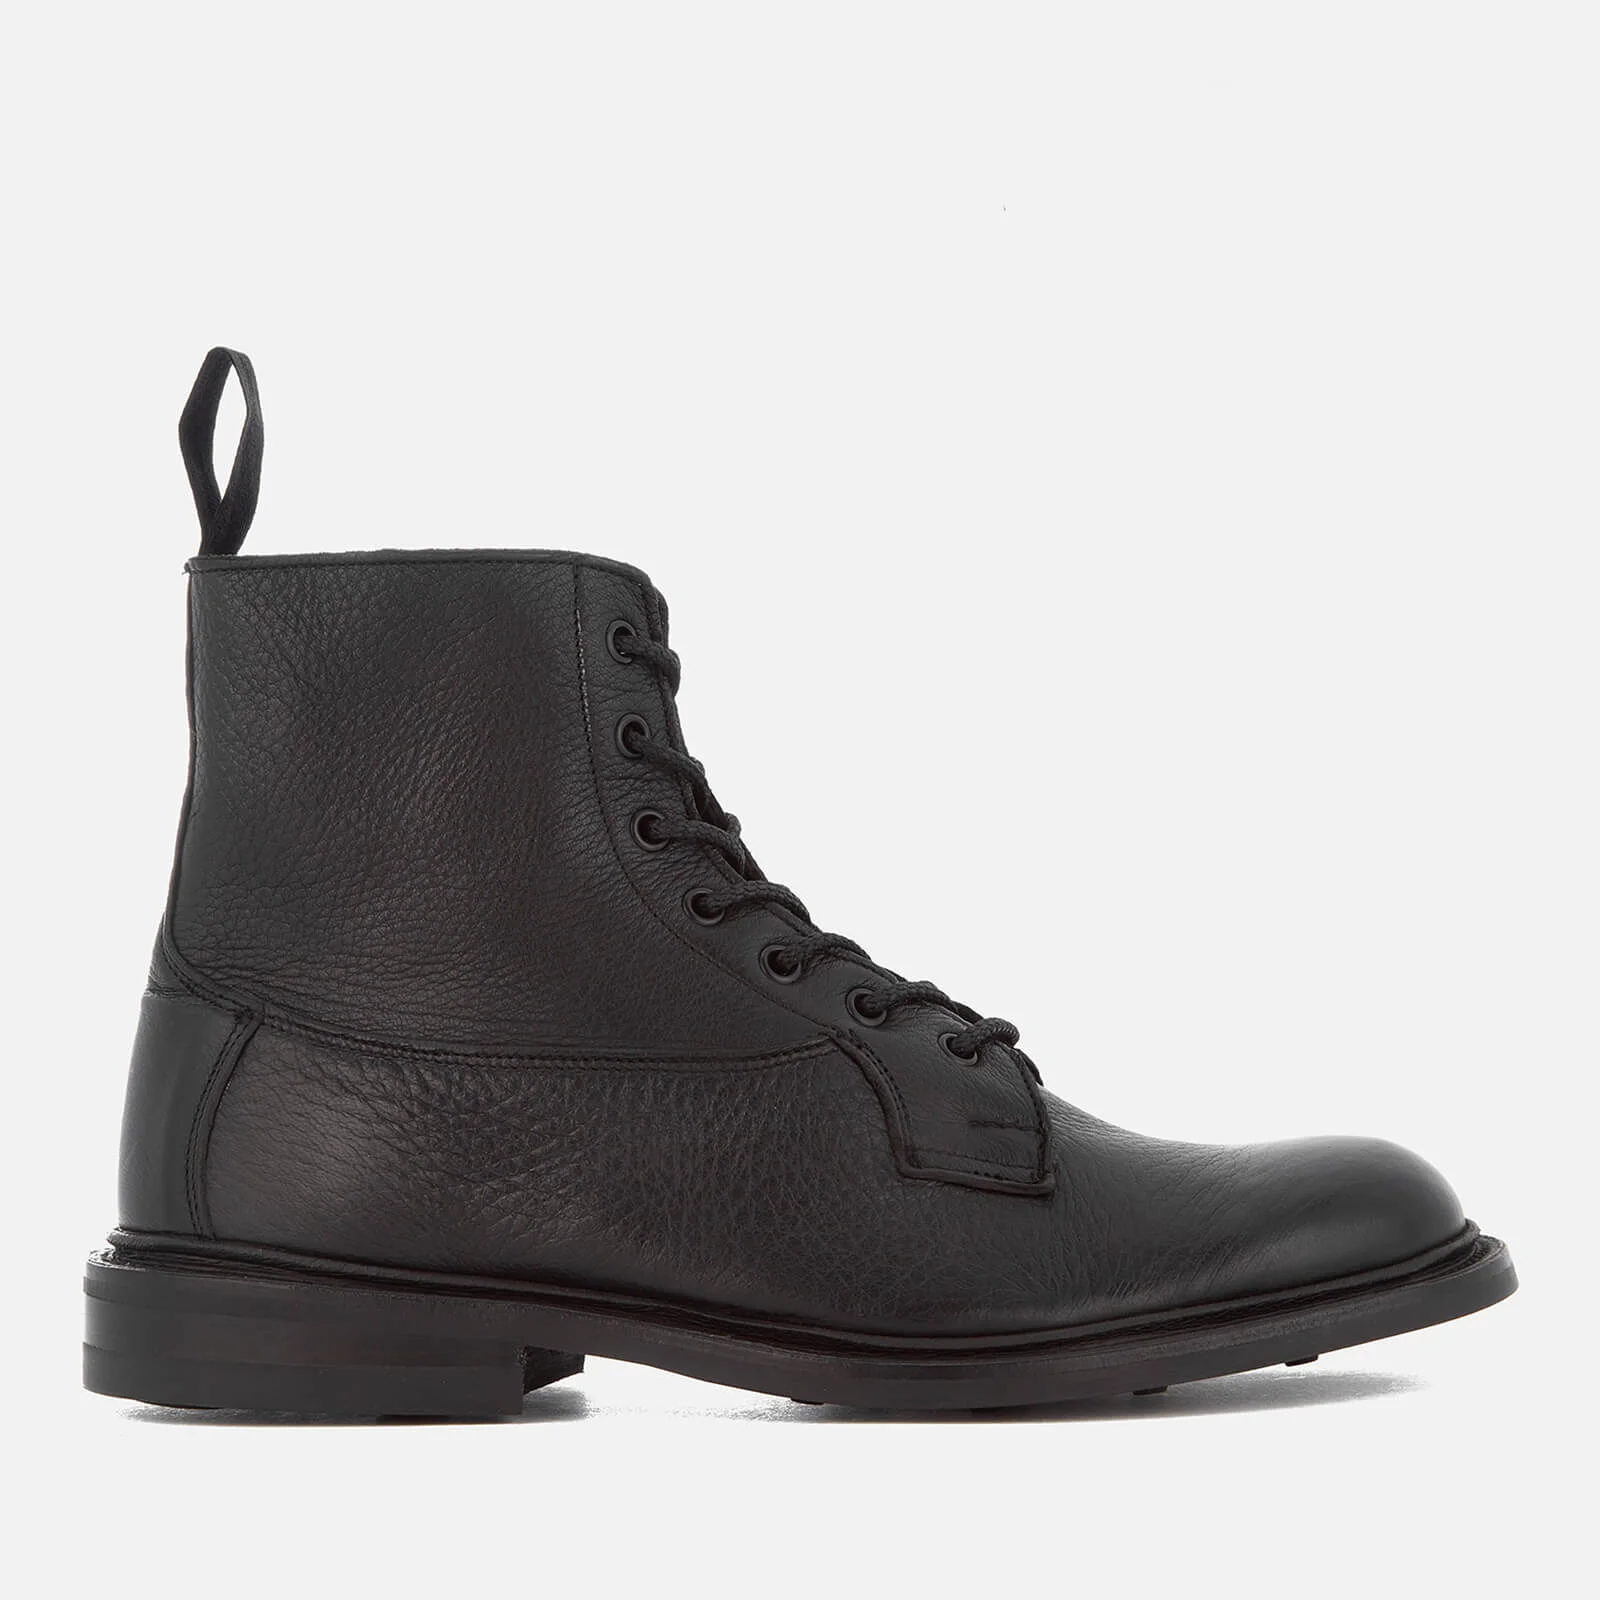 Tricker's Men's Burford Leather Lace Up Boots - Black Image 1